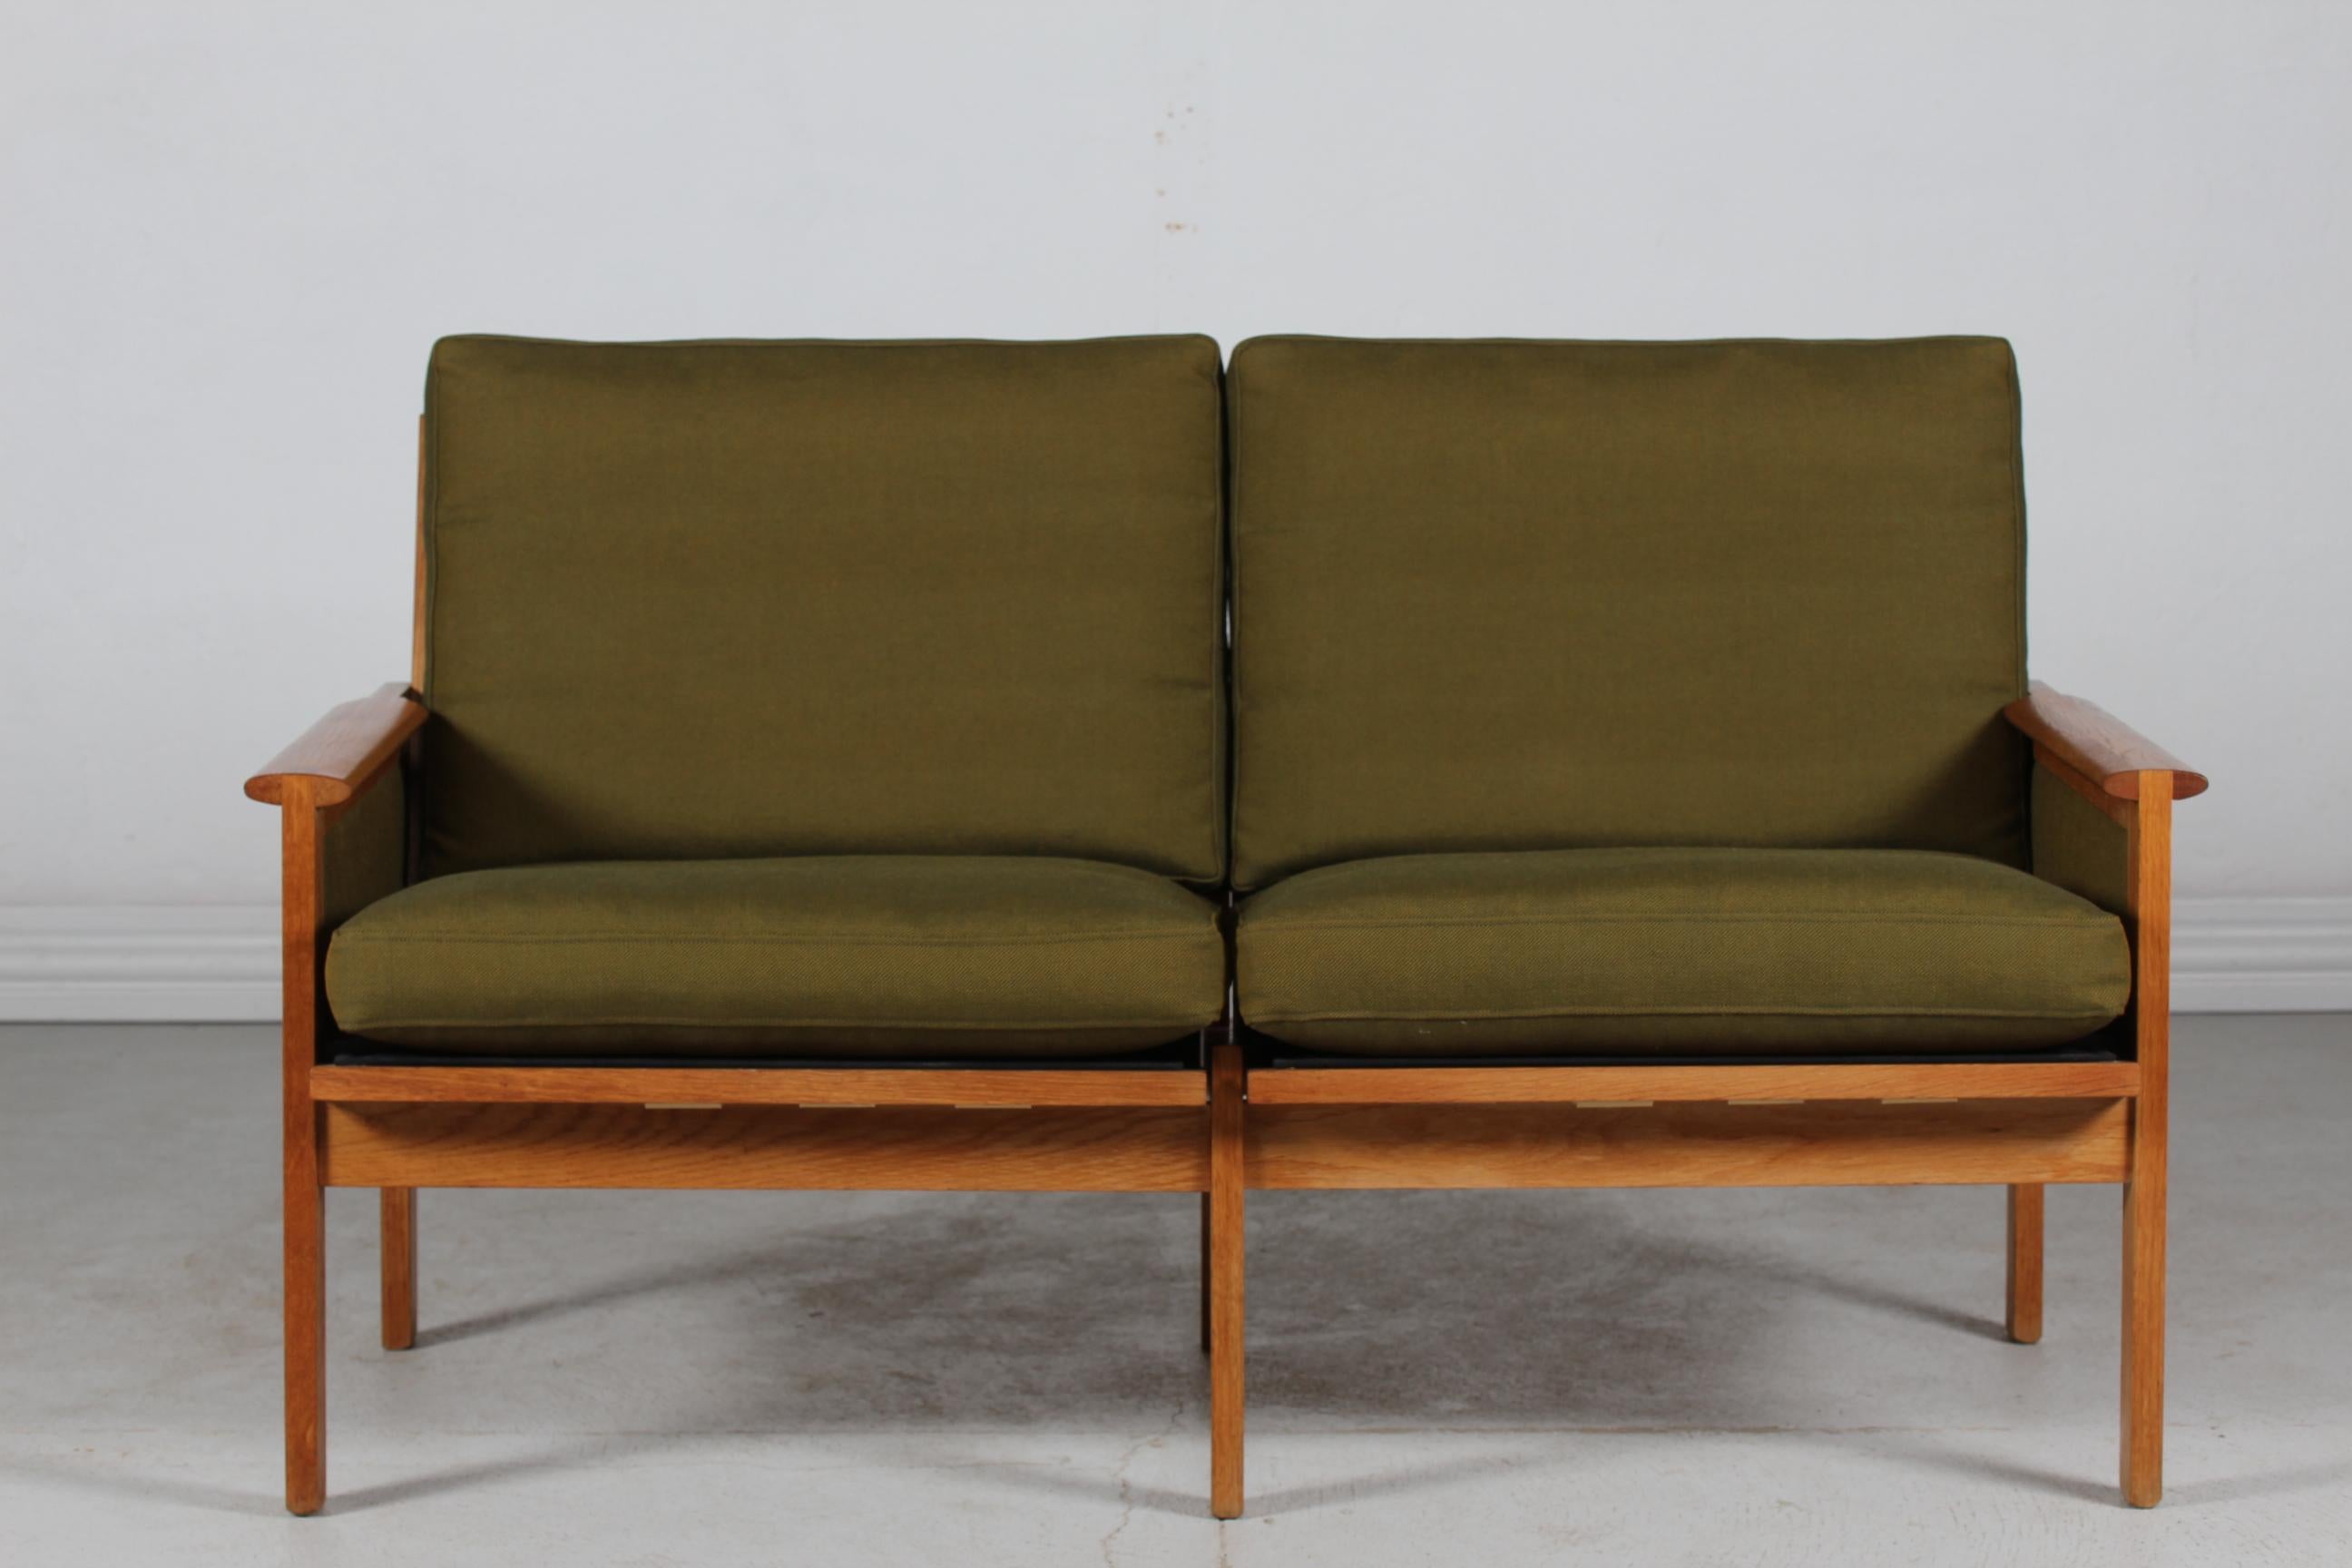 Danish vintage two-seater sofa Capella designed by the Danish furniture designer Kristian Illum Wikkelsø (1919-1999) manufactured by Niels Eilersen, Denmark.
The sofa is made of solid oak and upholstered with the original green colored